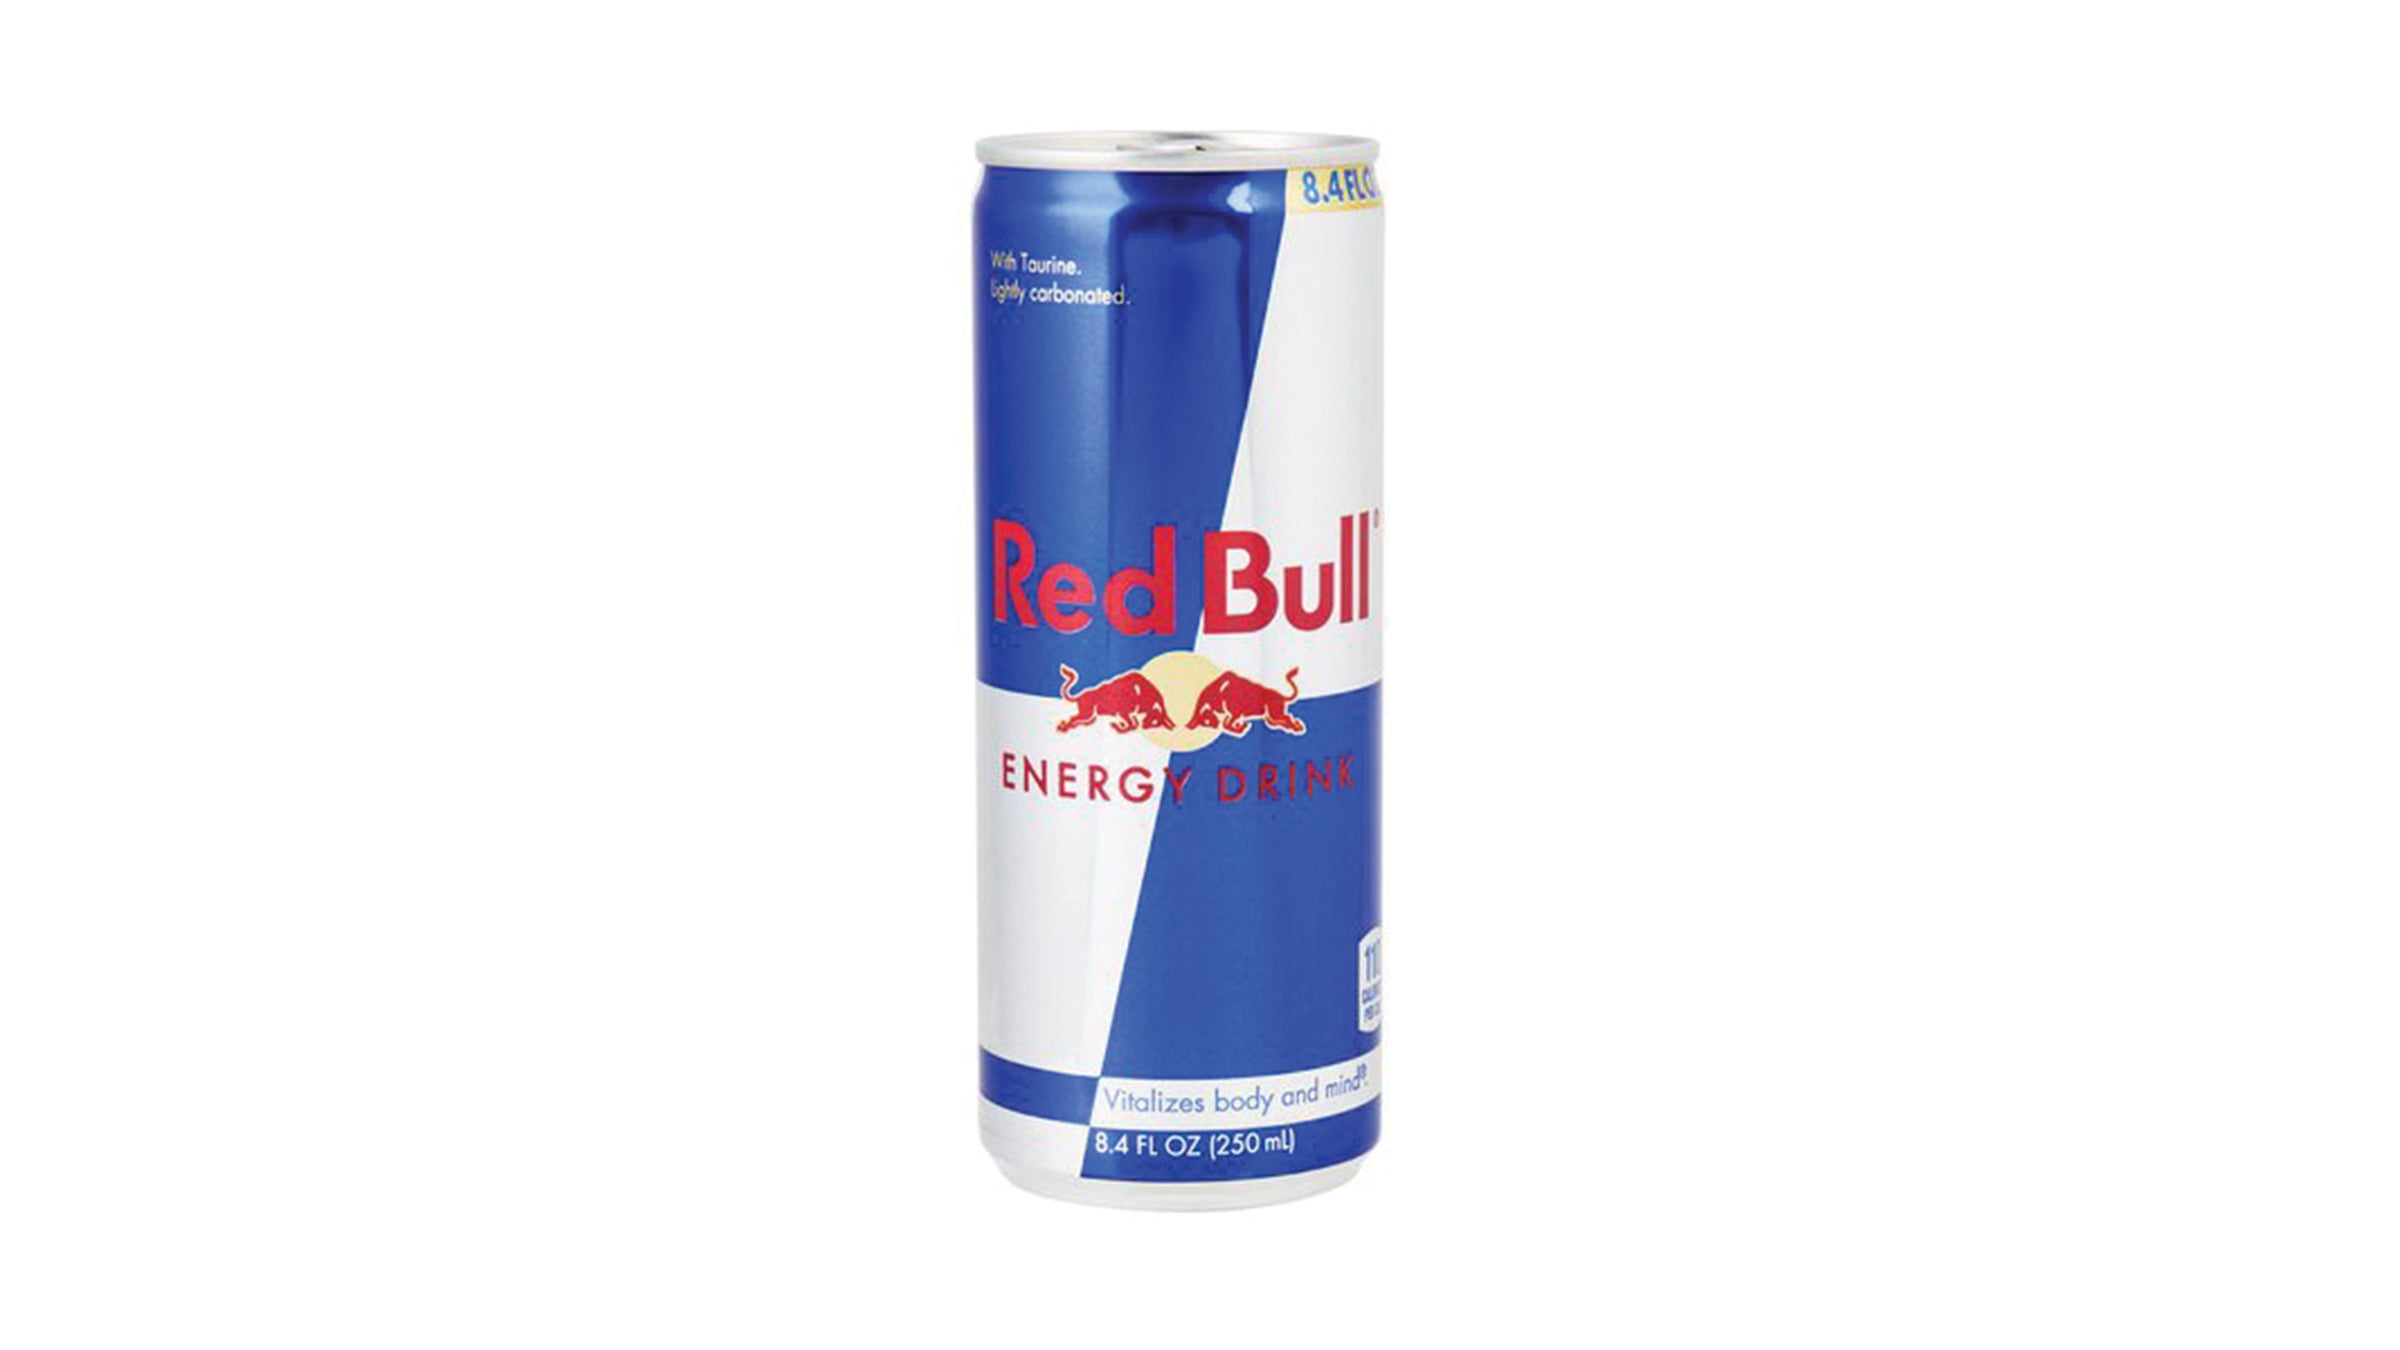 Can of Red Bull